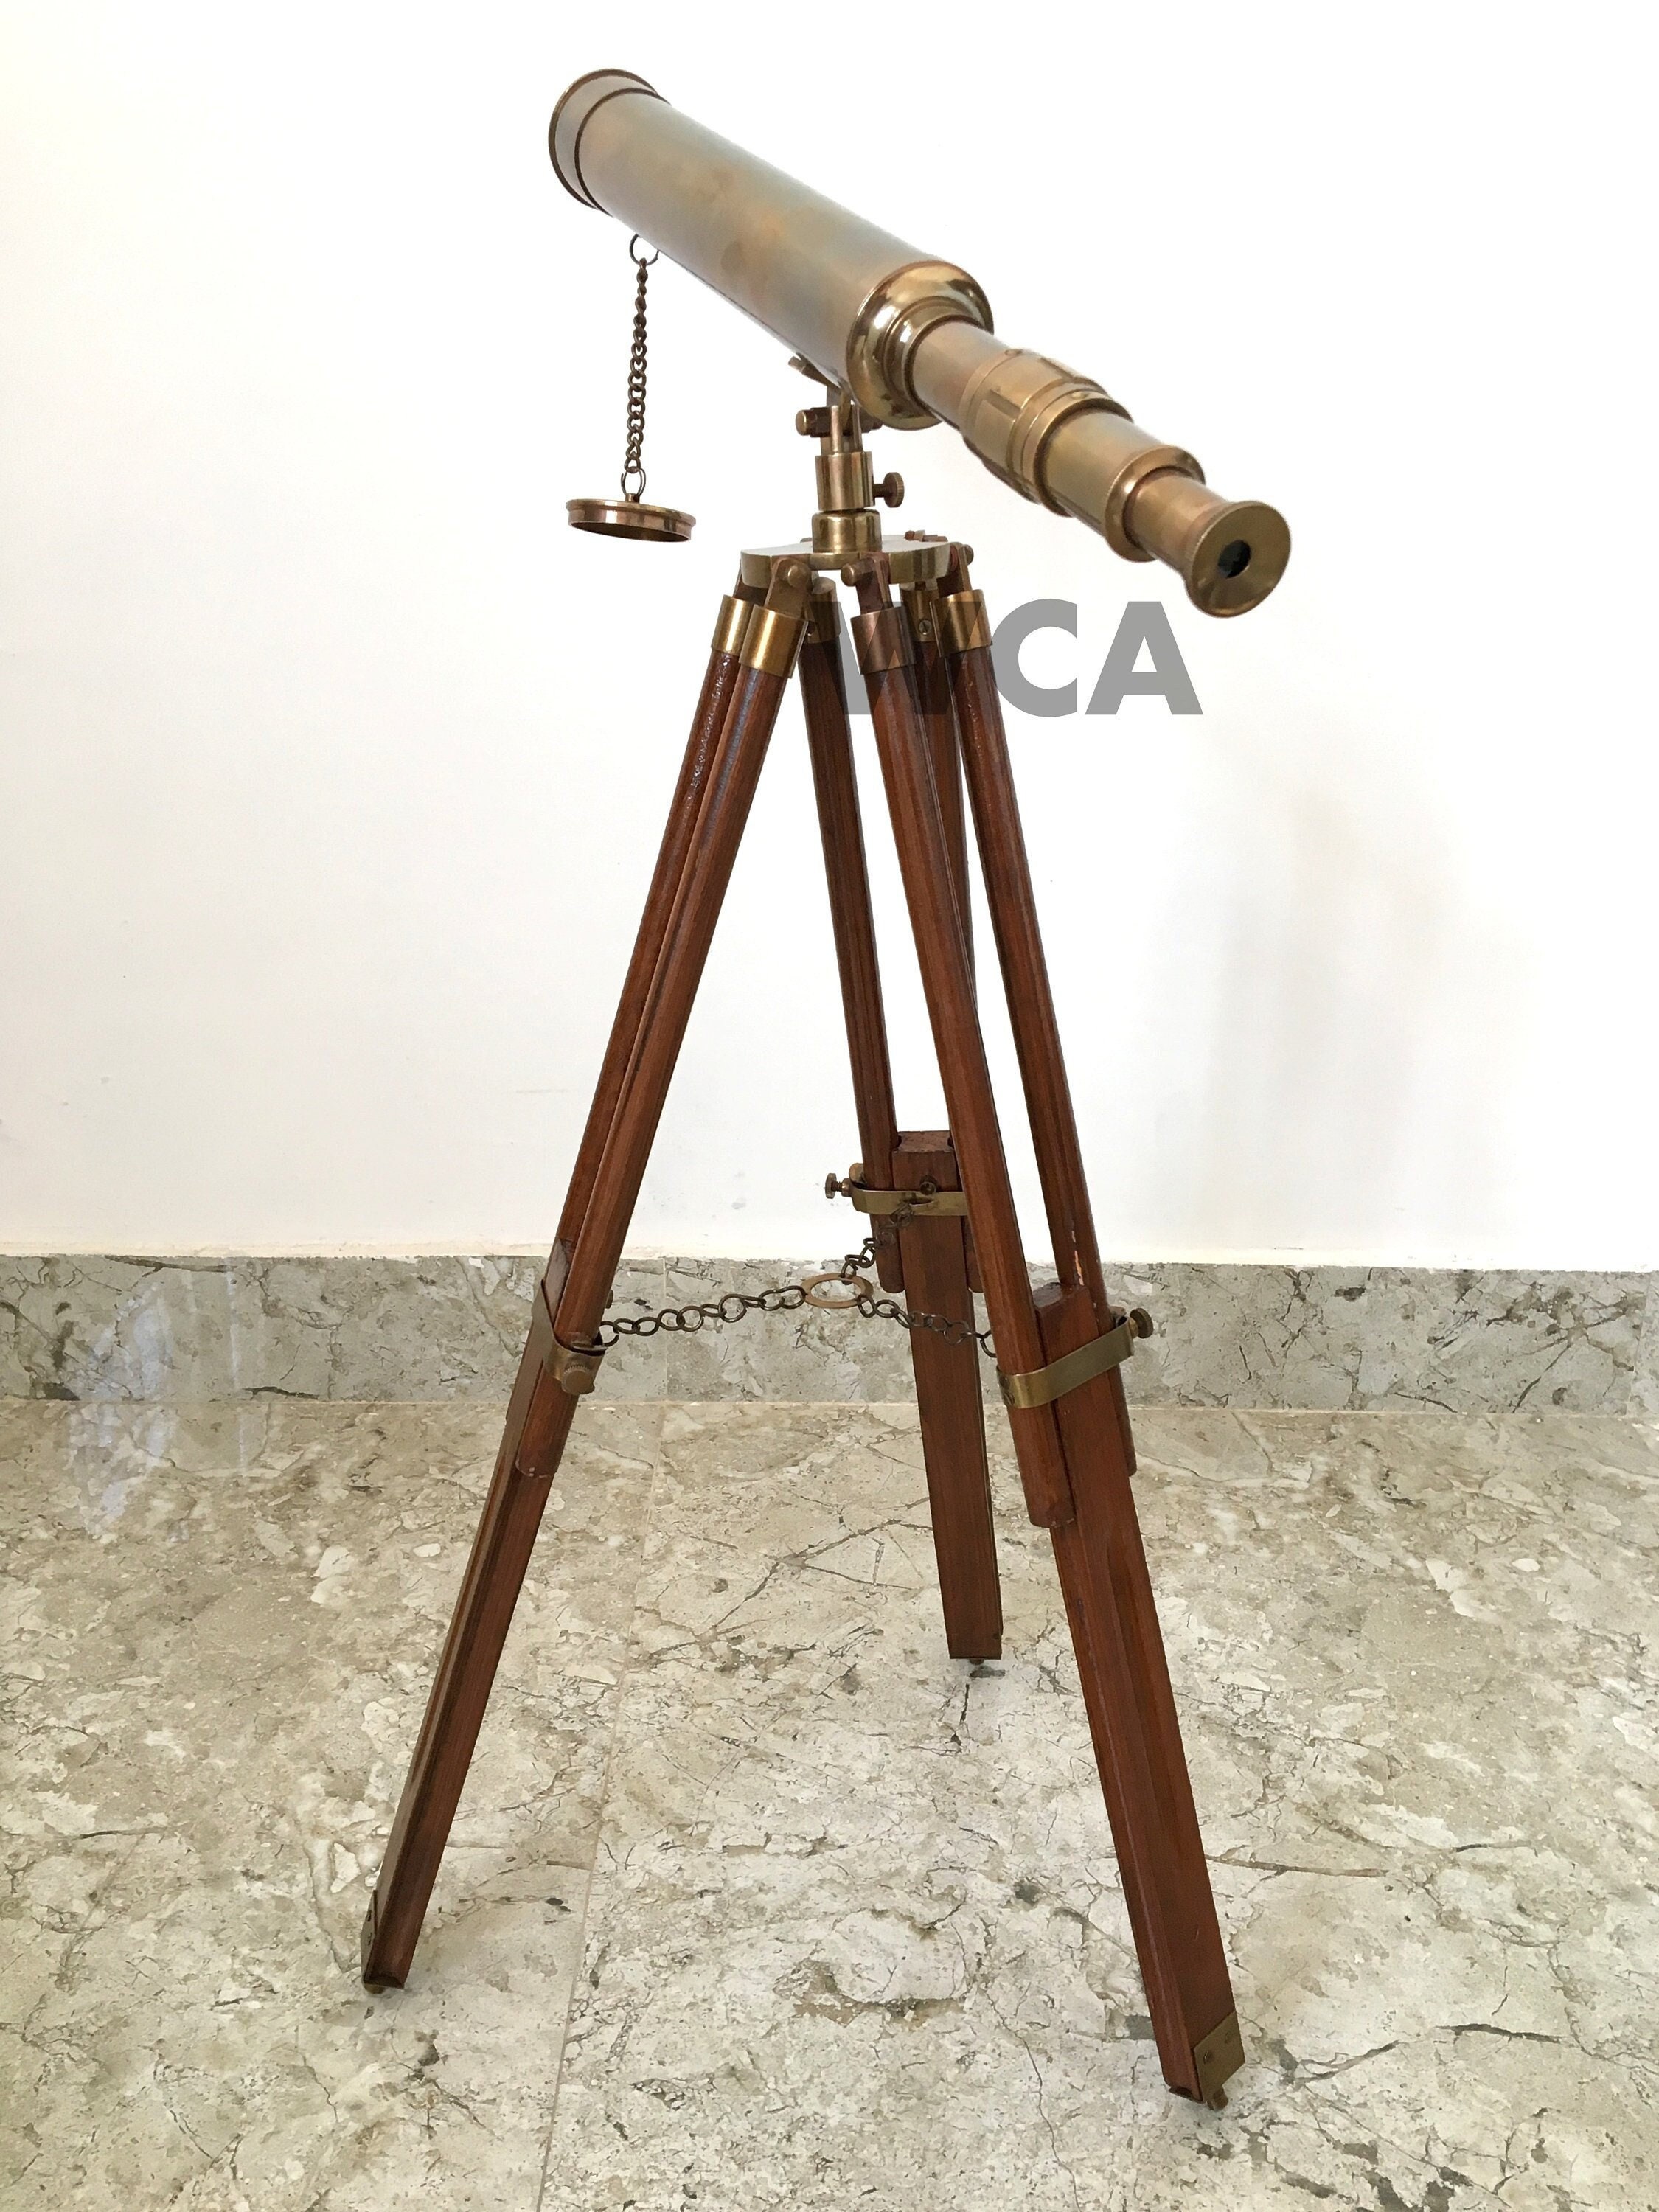 Details about   Nautical Polished Brass Spyglass Telescope With Wooden Tripod Stand Desk Decor 